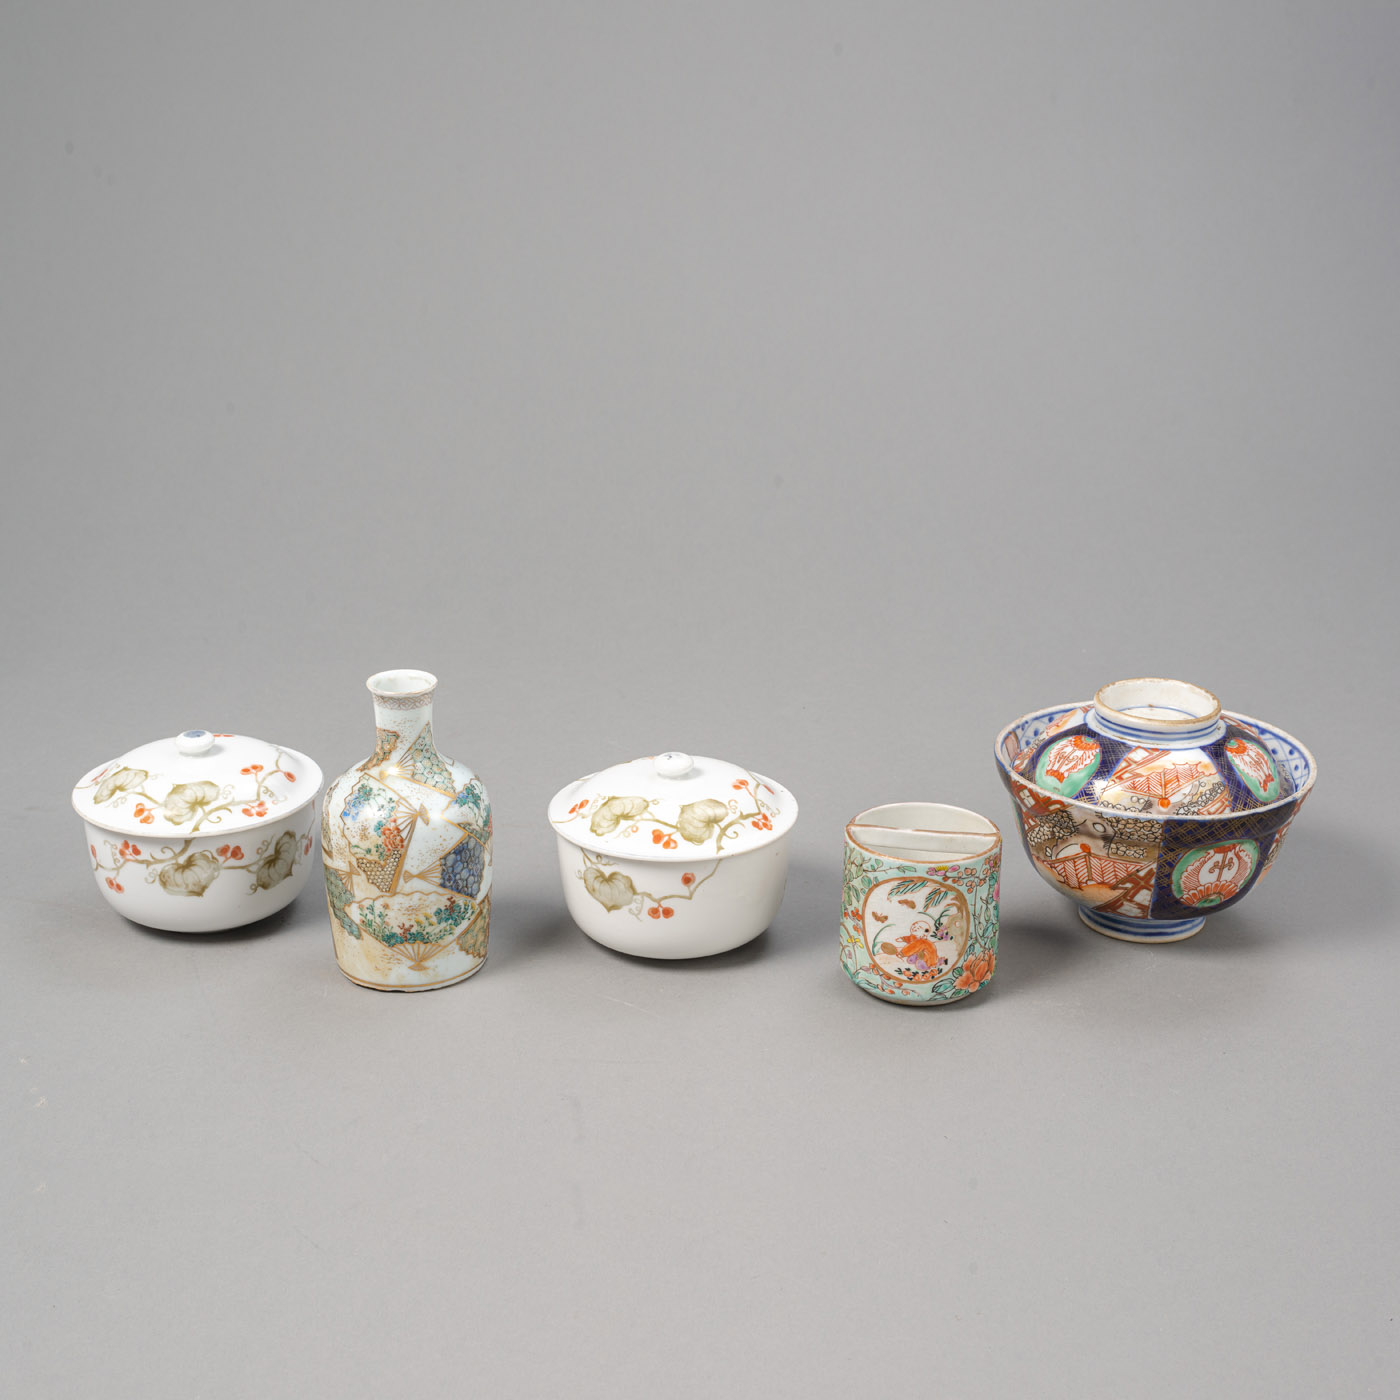 <b>AN IMARI-PORCELAIN LIDDED BOWL, A SMALL SAKE BOTTLE, AND TWO BOXES AND COVERS</b>